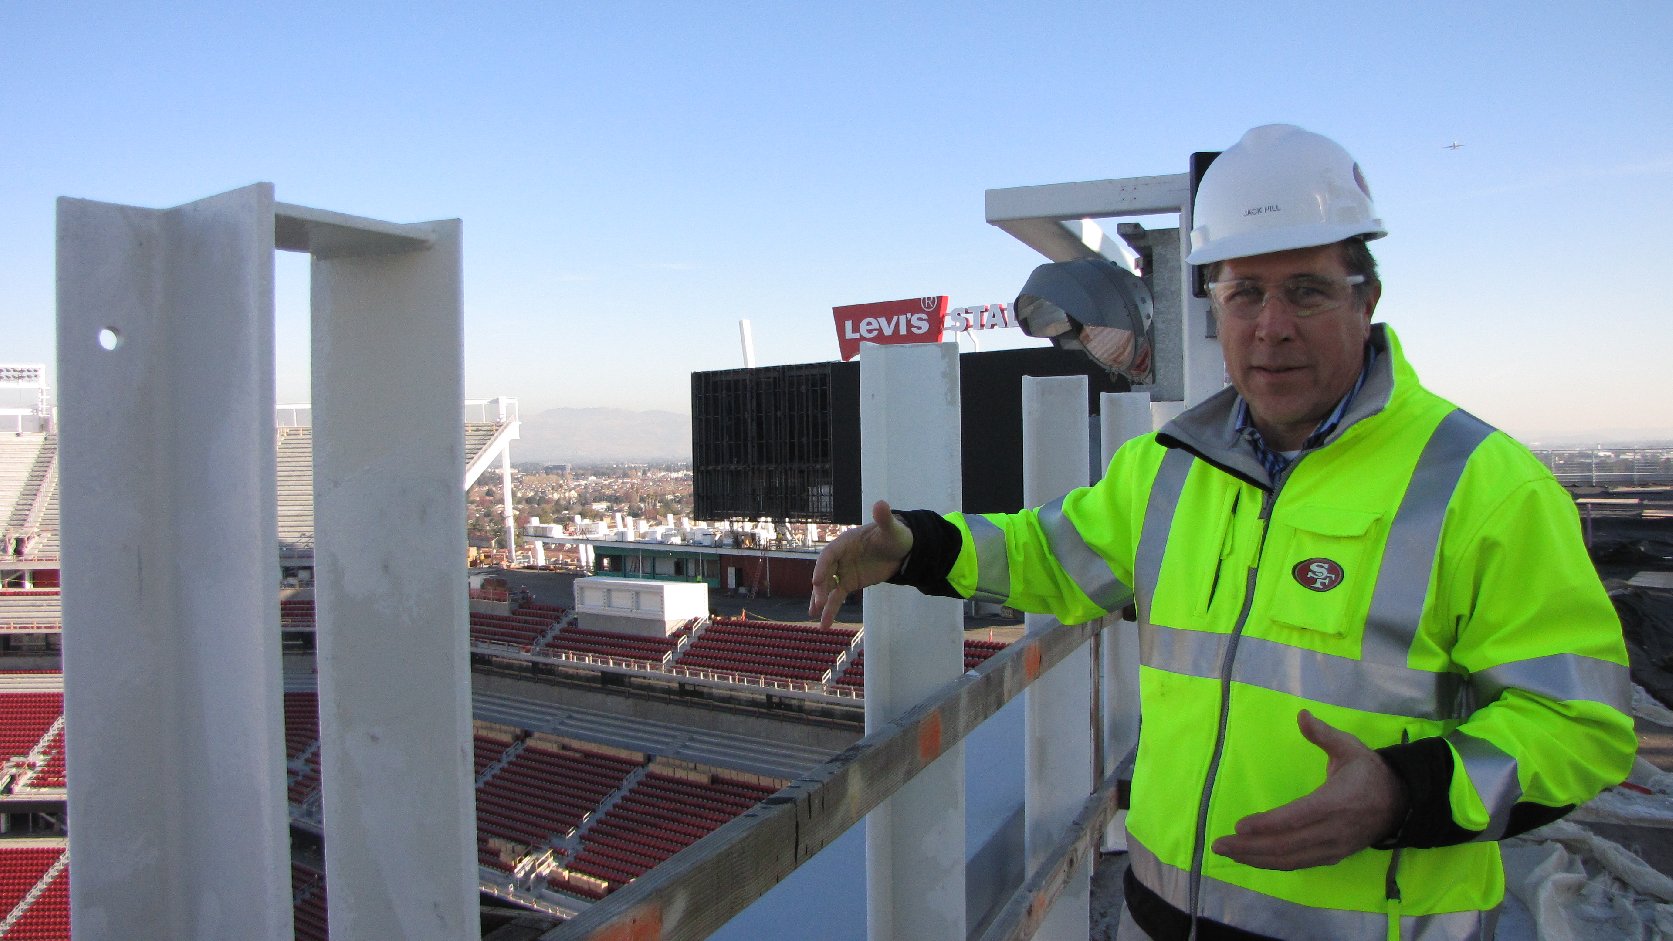 As project executive, Jack Hill oversees the construction of Levi's Stadium. (Molly Samuel/KQED)